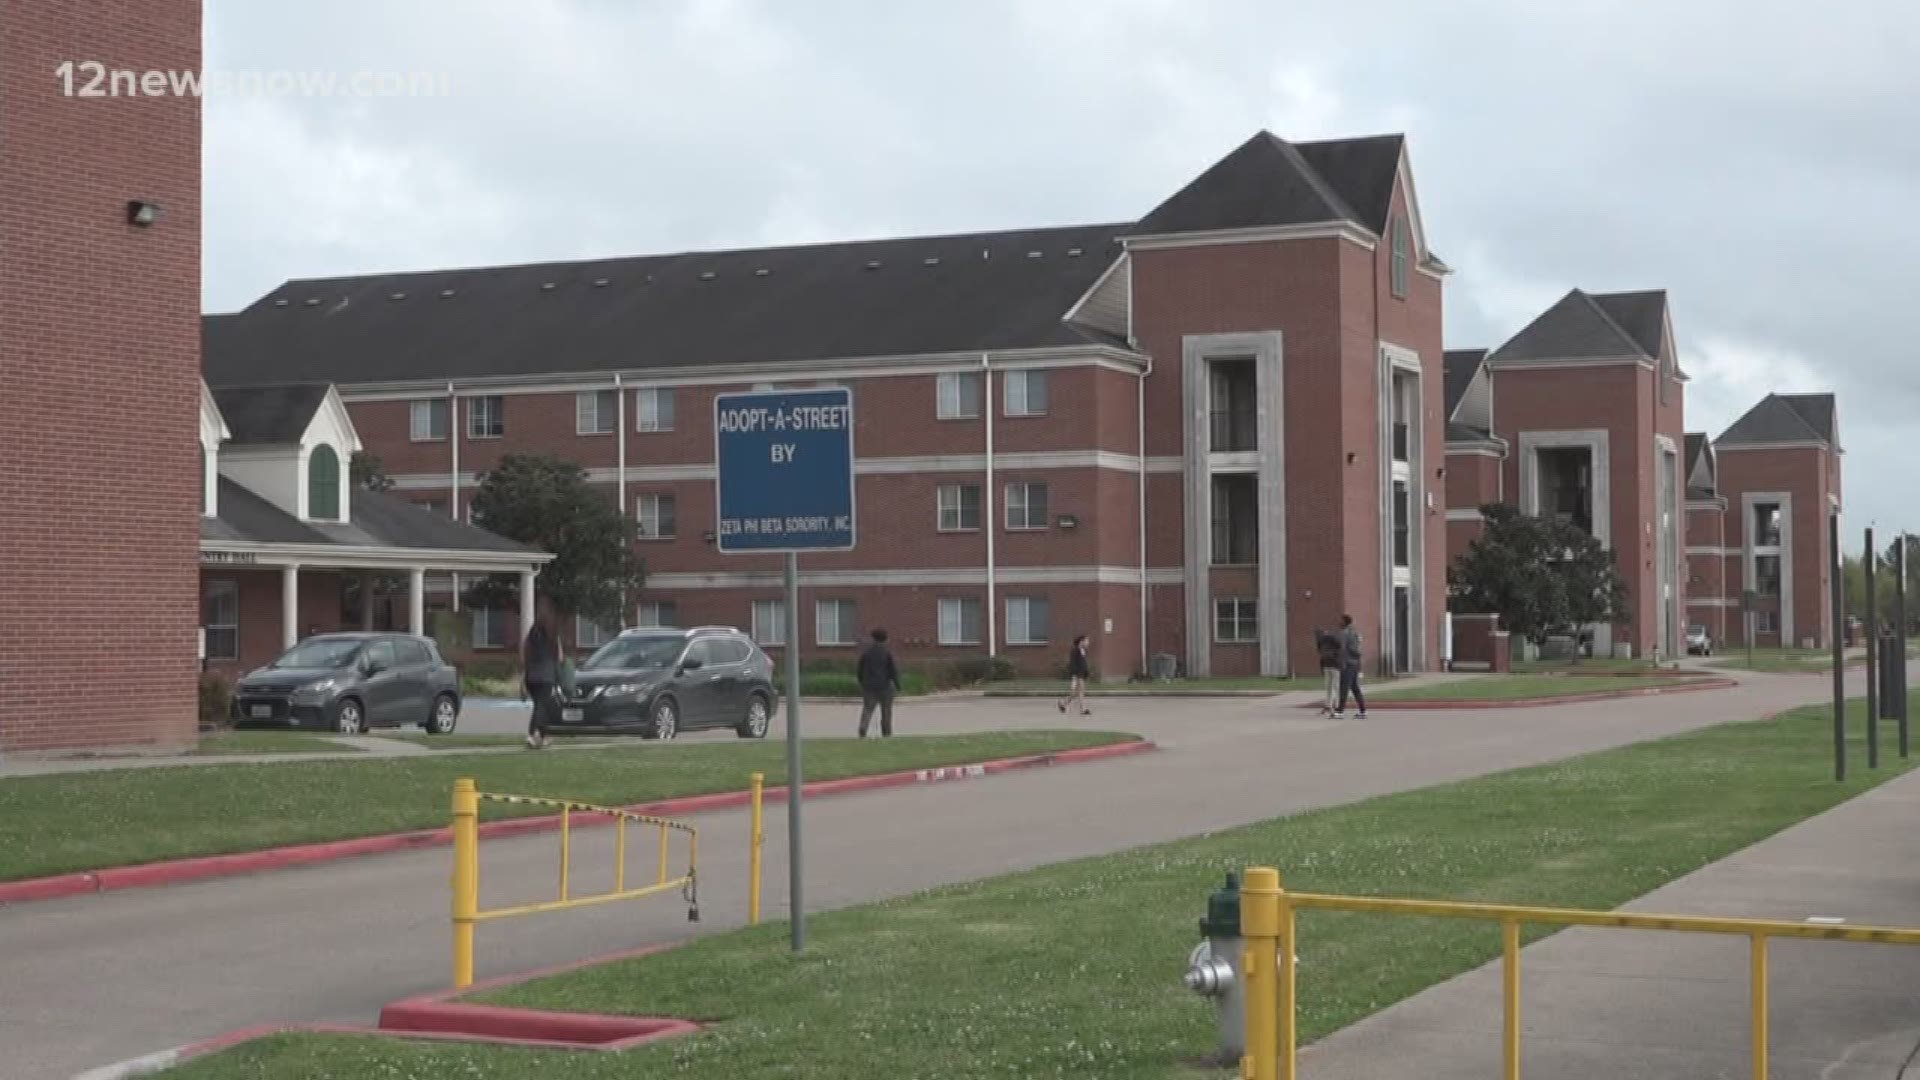 Lamar, LIT, LSCPA & LSCO are all making changes to classes amid coronavirus concerns.